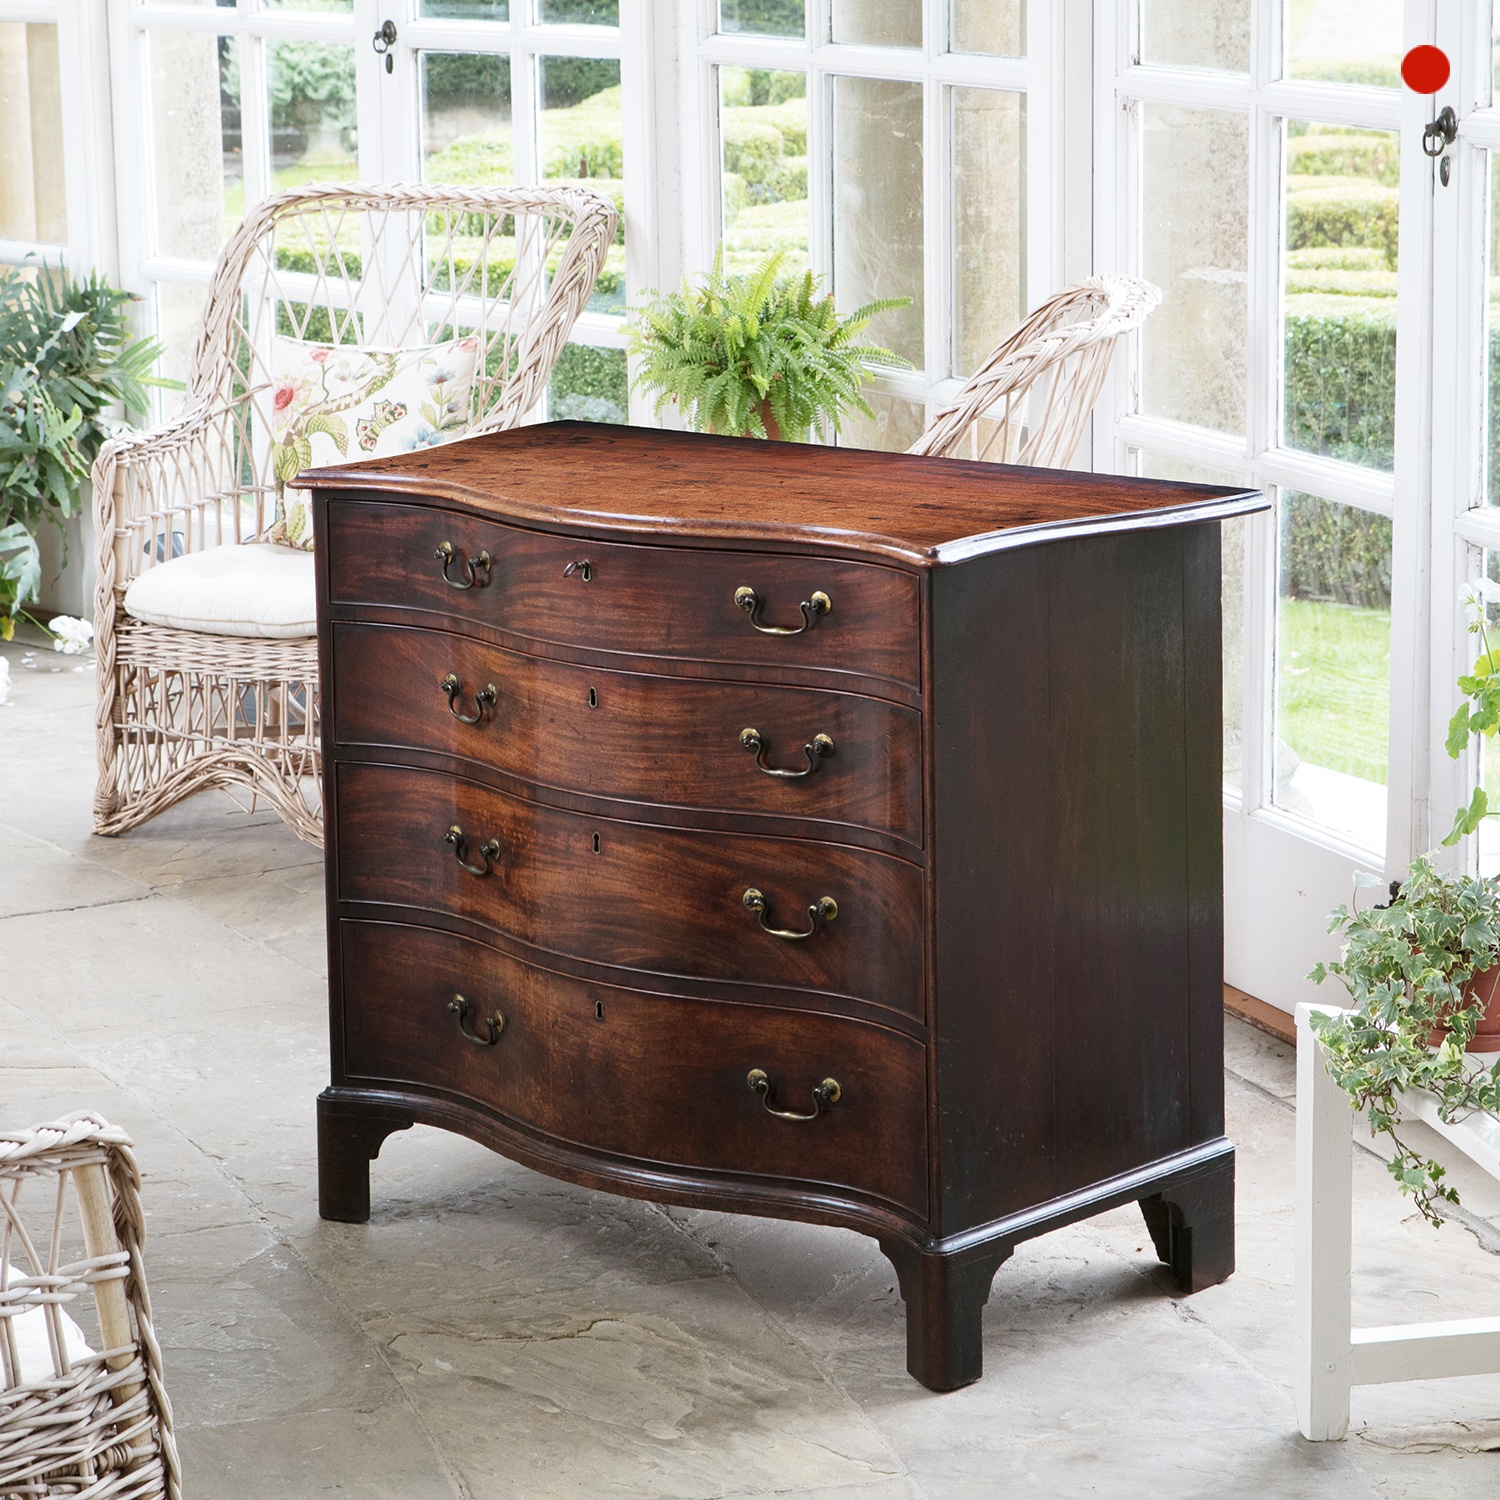 A fine George III mahogany serpentine chest of drawers in the manor of Henry Hill of Marlborough 1